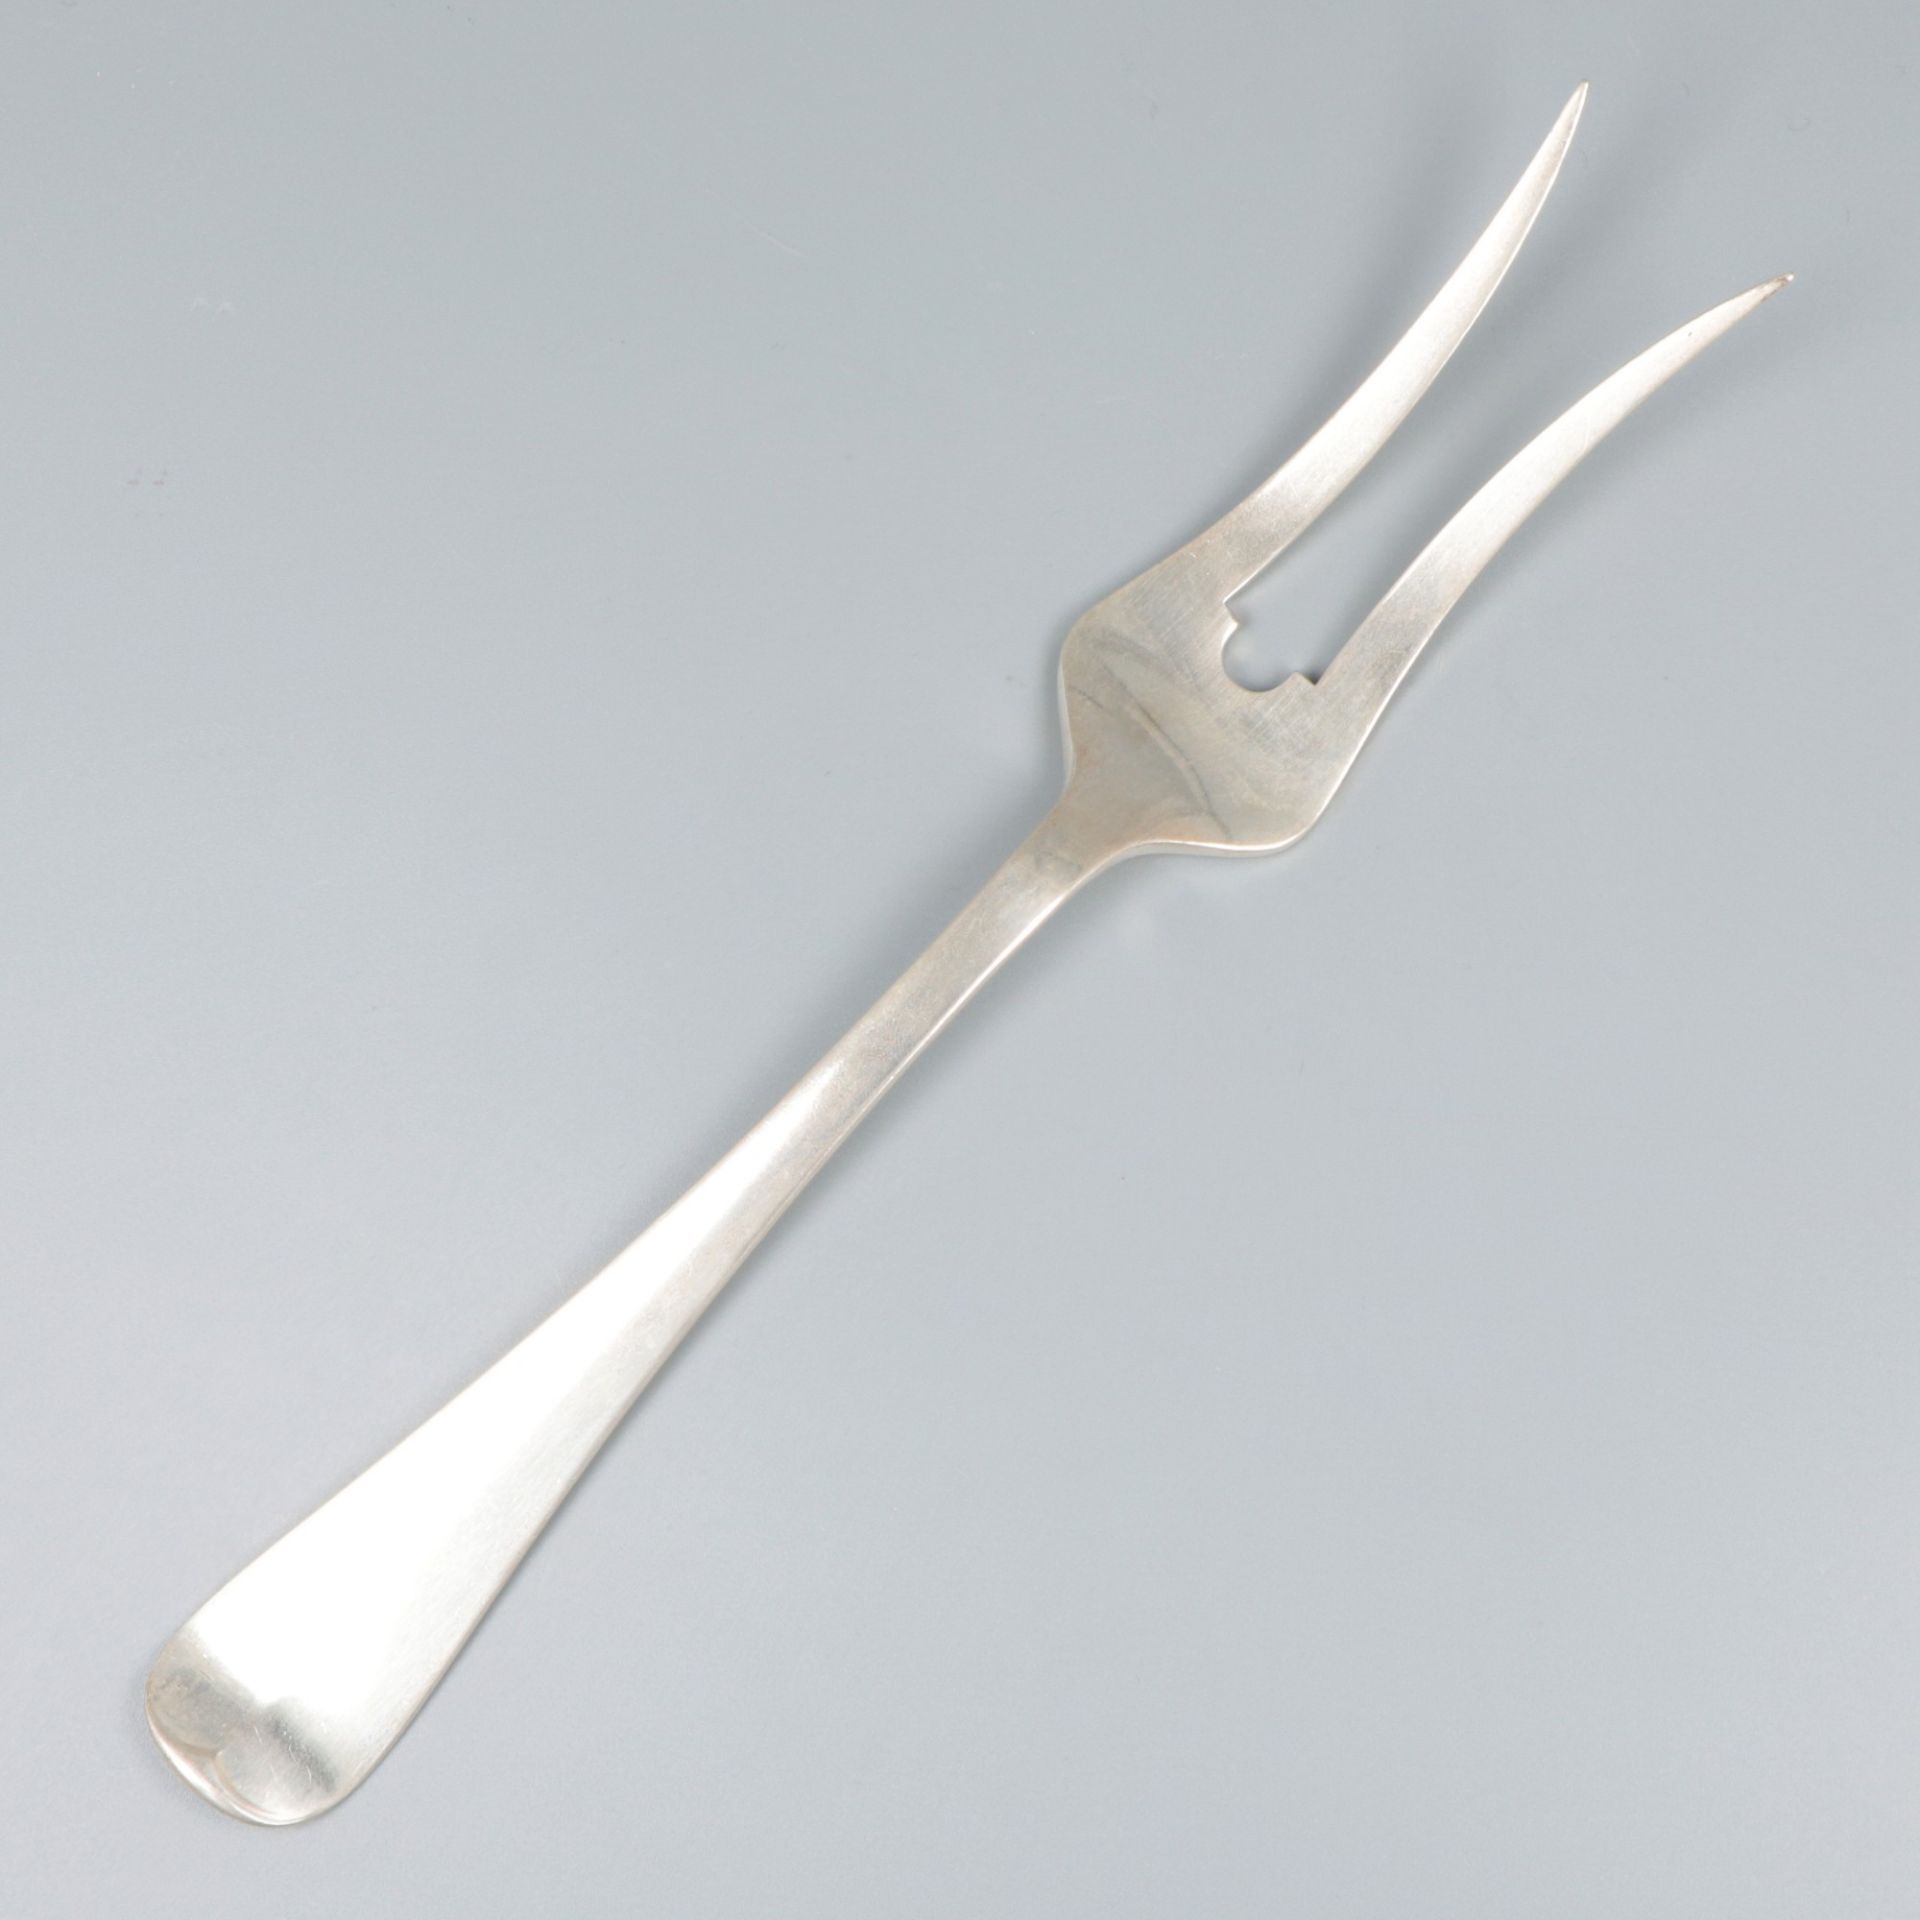 Meat serving fork "Haags Lofje" silver.